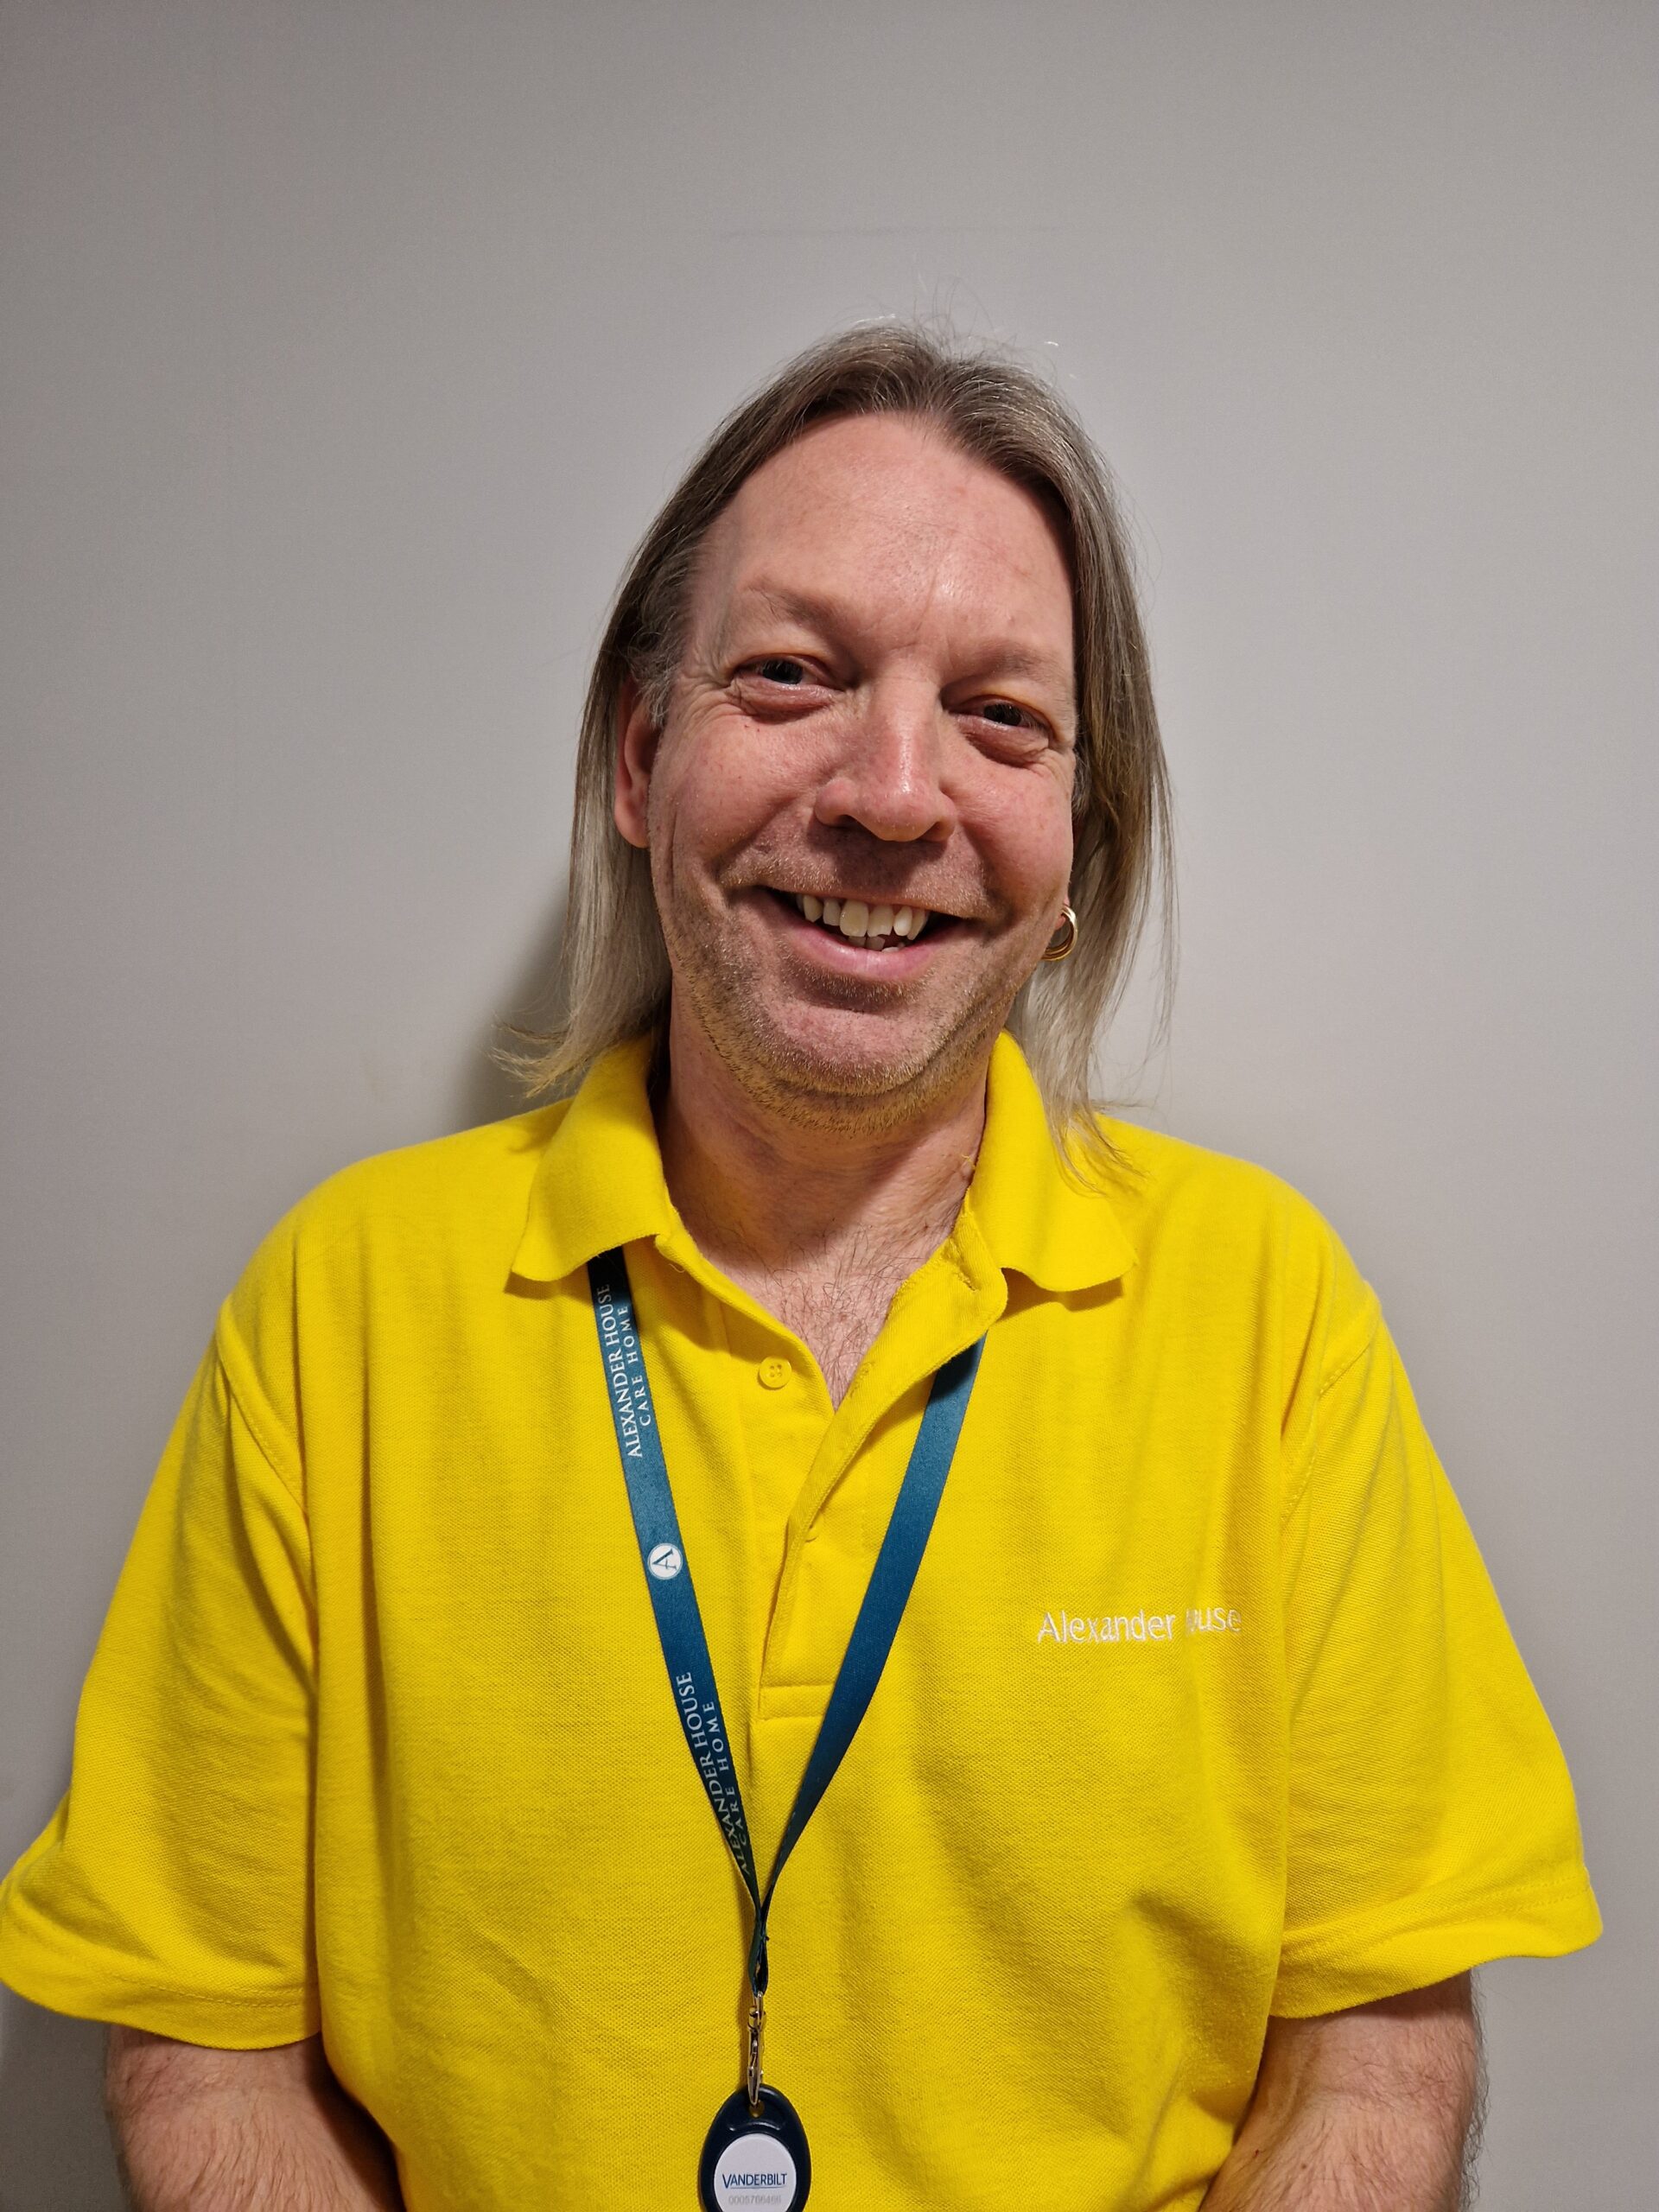 A team member in a yellow polo top and blue lanyard.